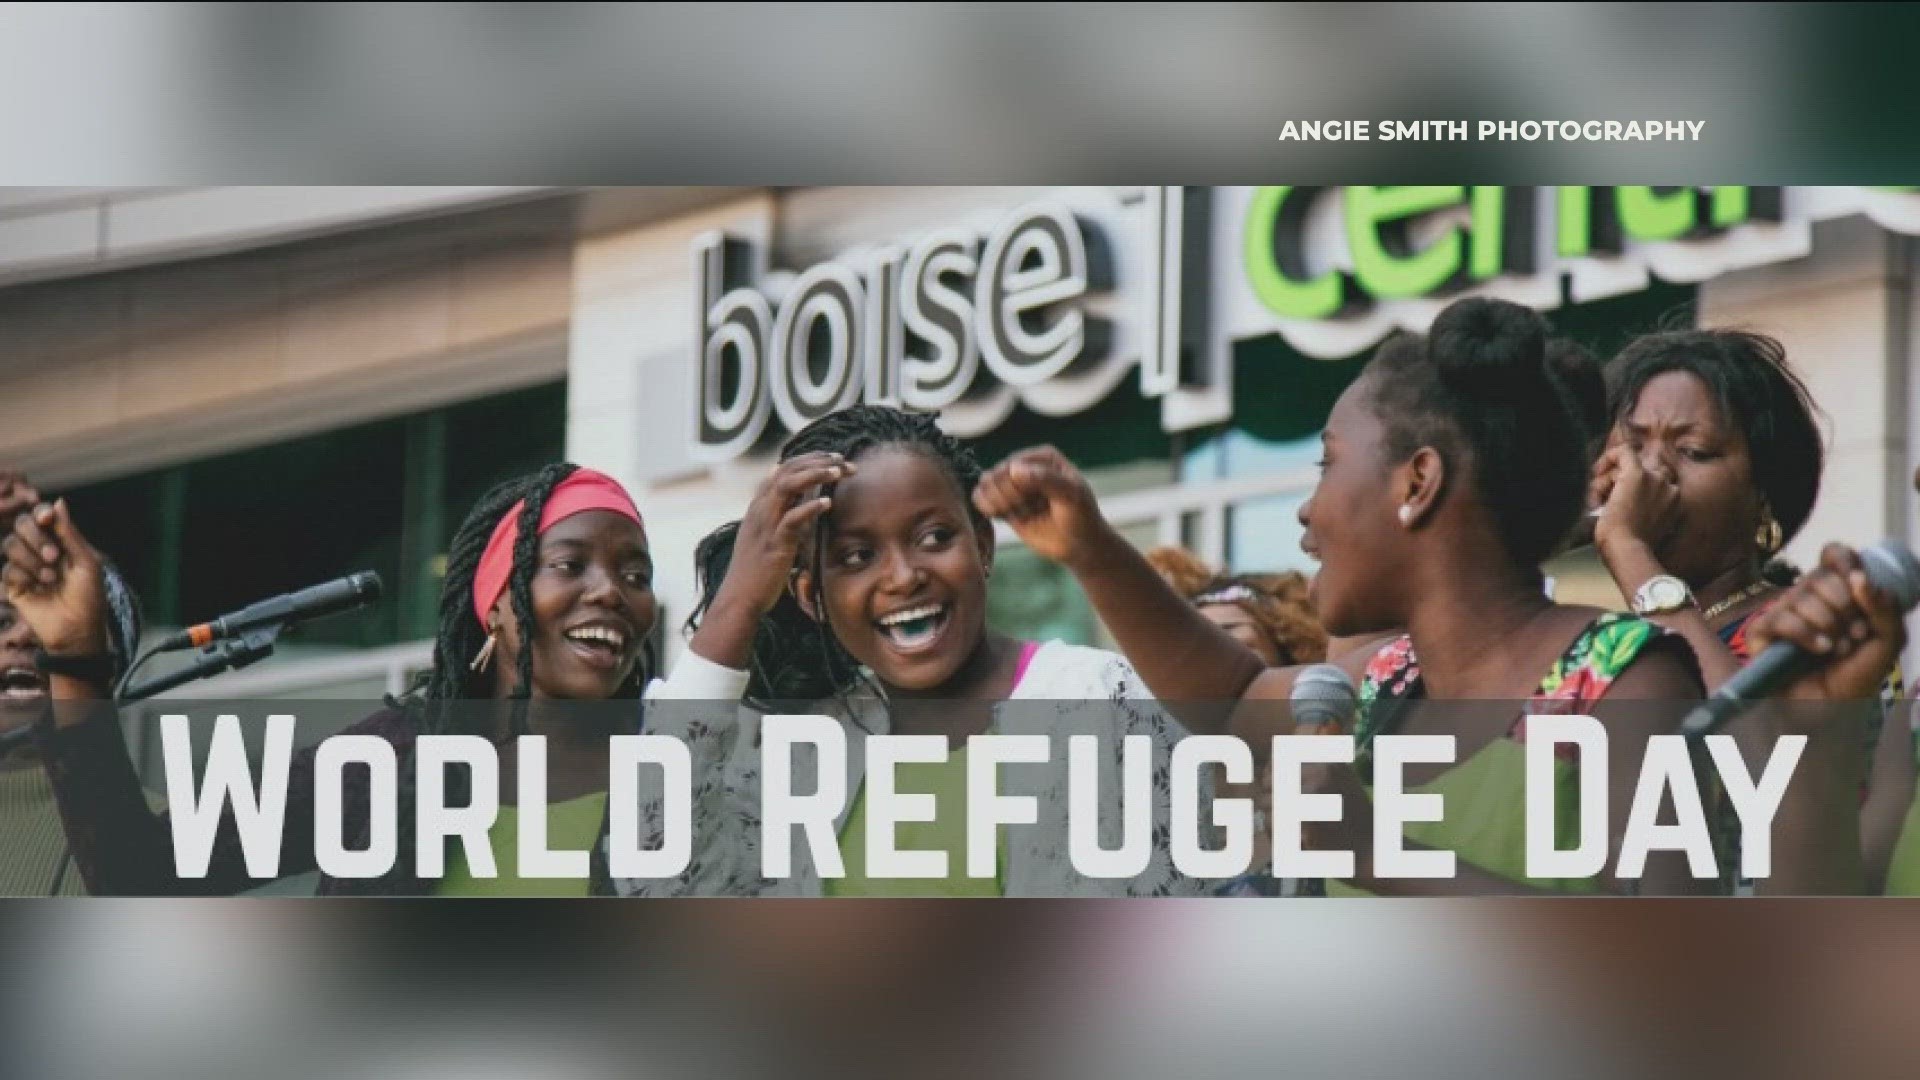 World Refugee Day is Saturday, June 17 at The Grove Plaza.